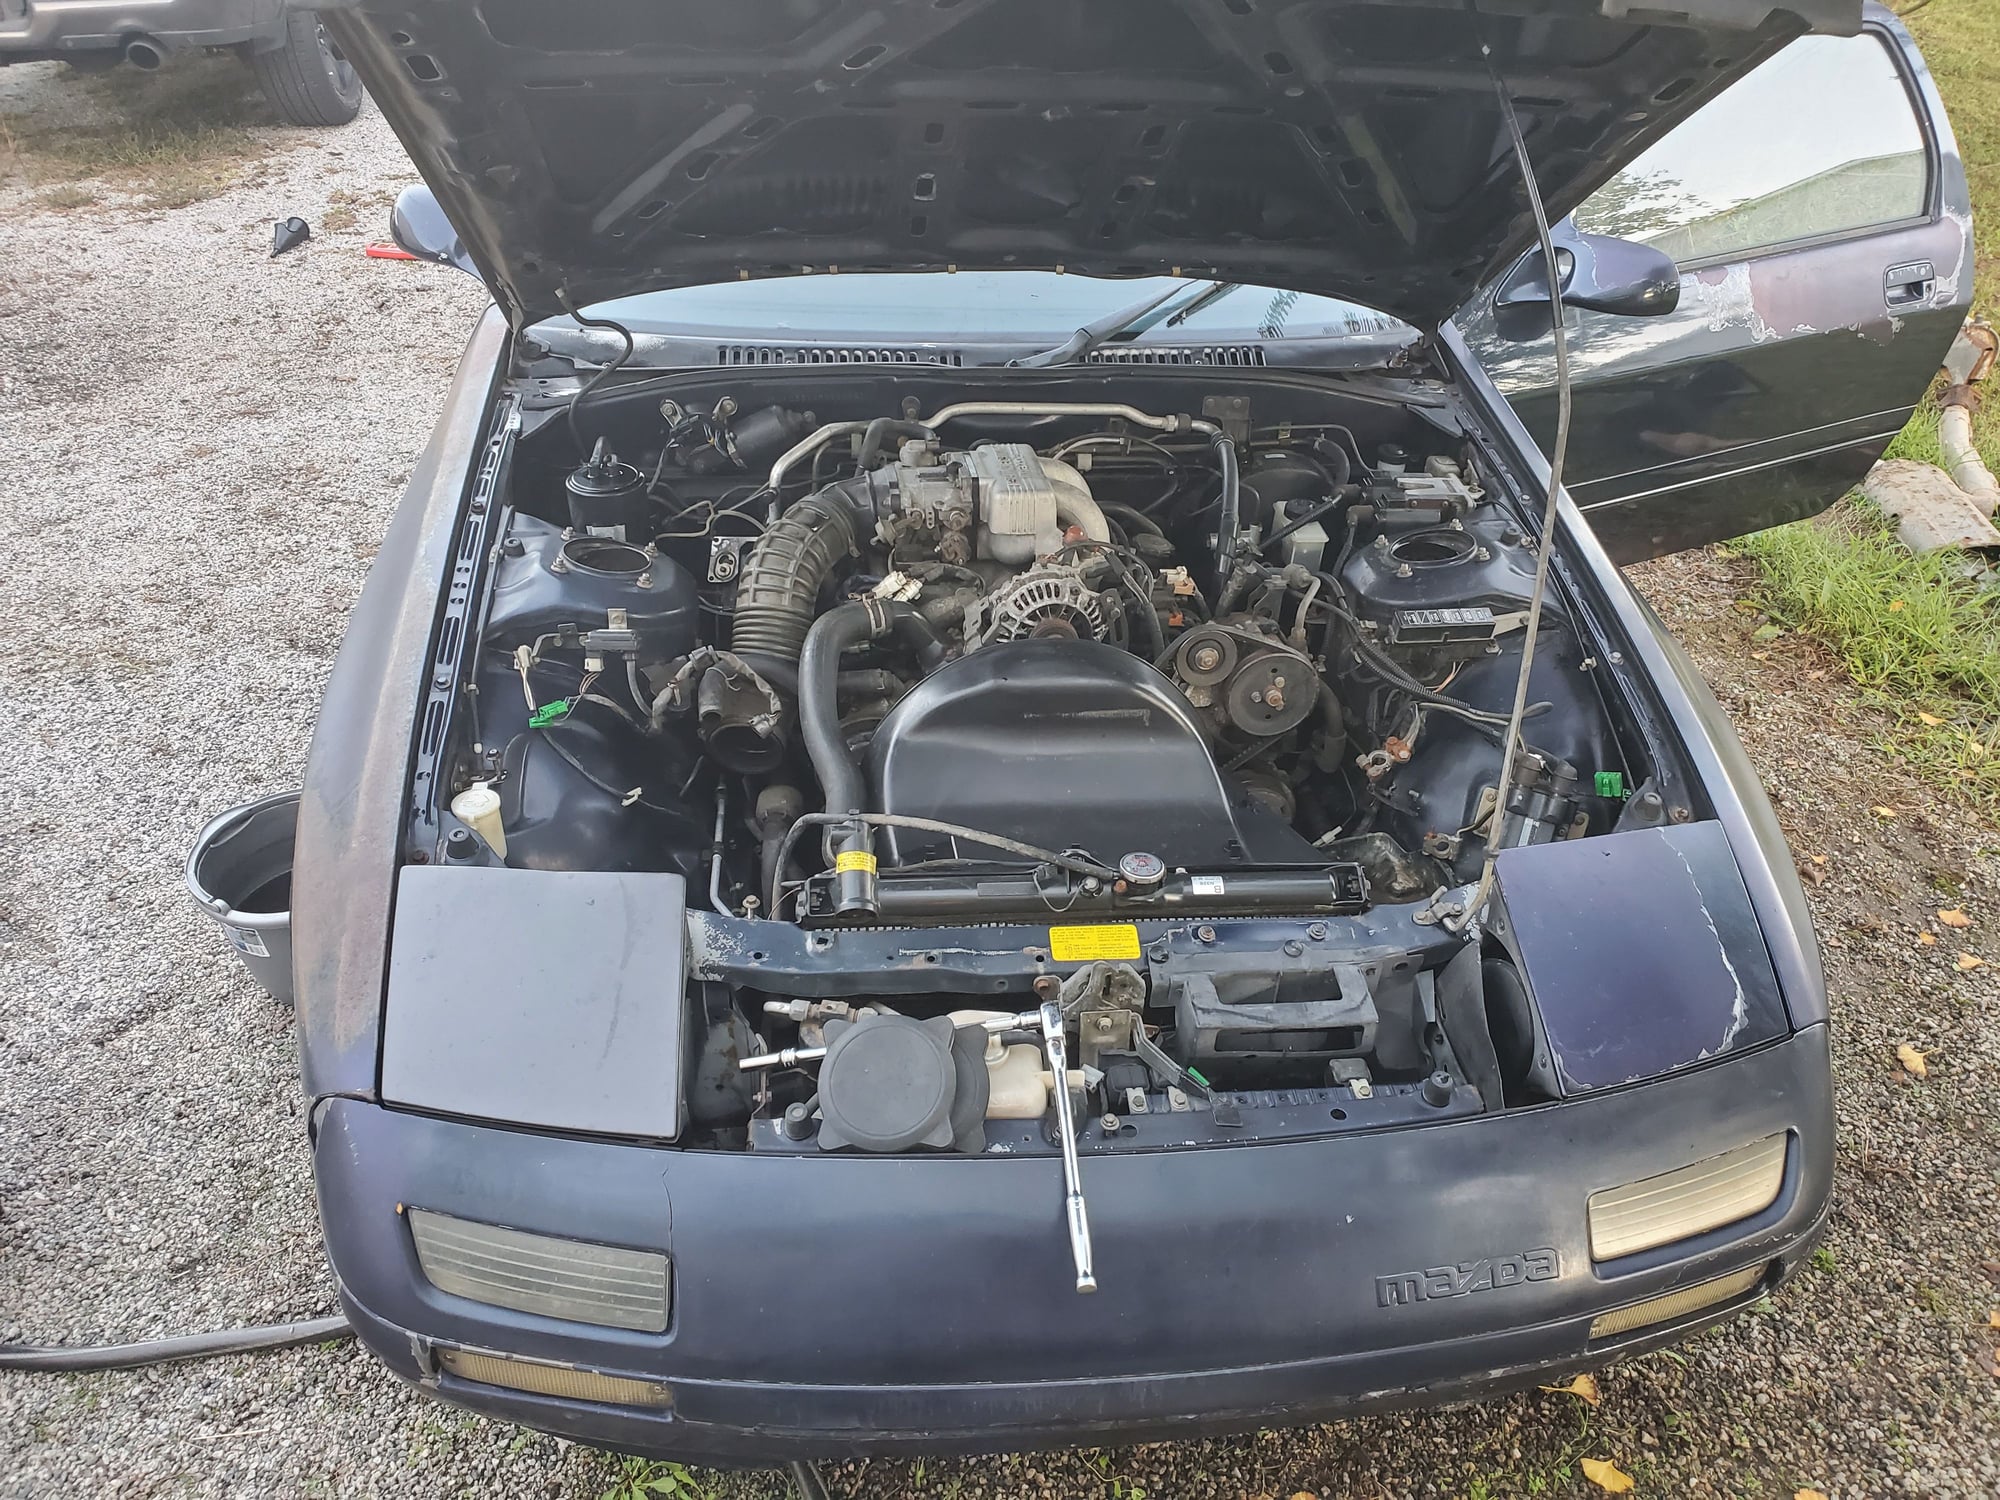 1991 Mazda RX-7 - 1991 Mazda RX7 coupe - Used - VIN JM1FC3310M0901091 - 110,000 Miles - Other - 2WD - Manual - Coupe - Blue - Princeton, NC 27569, United States